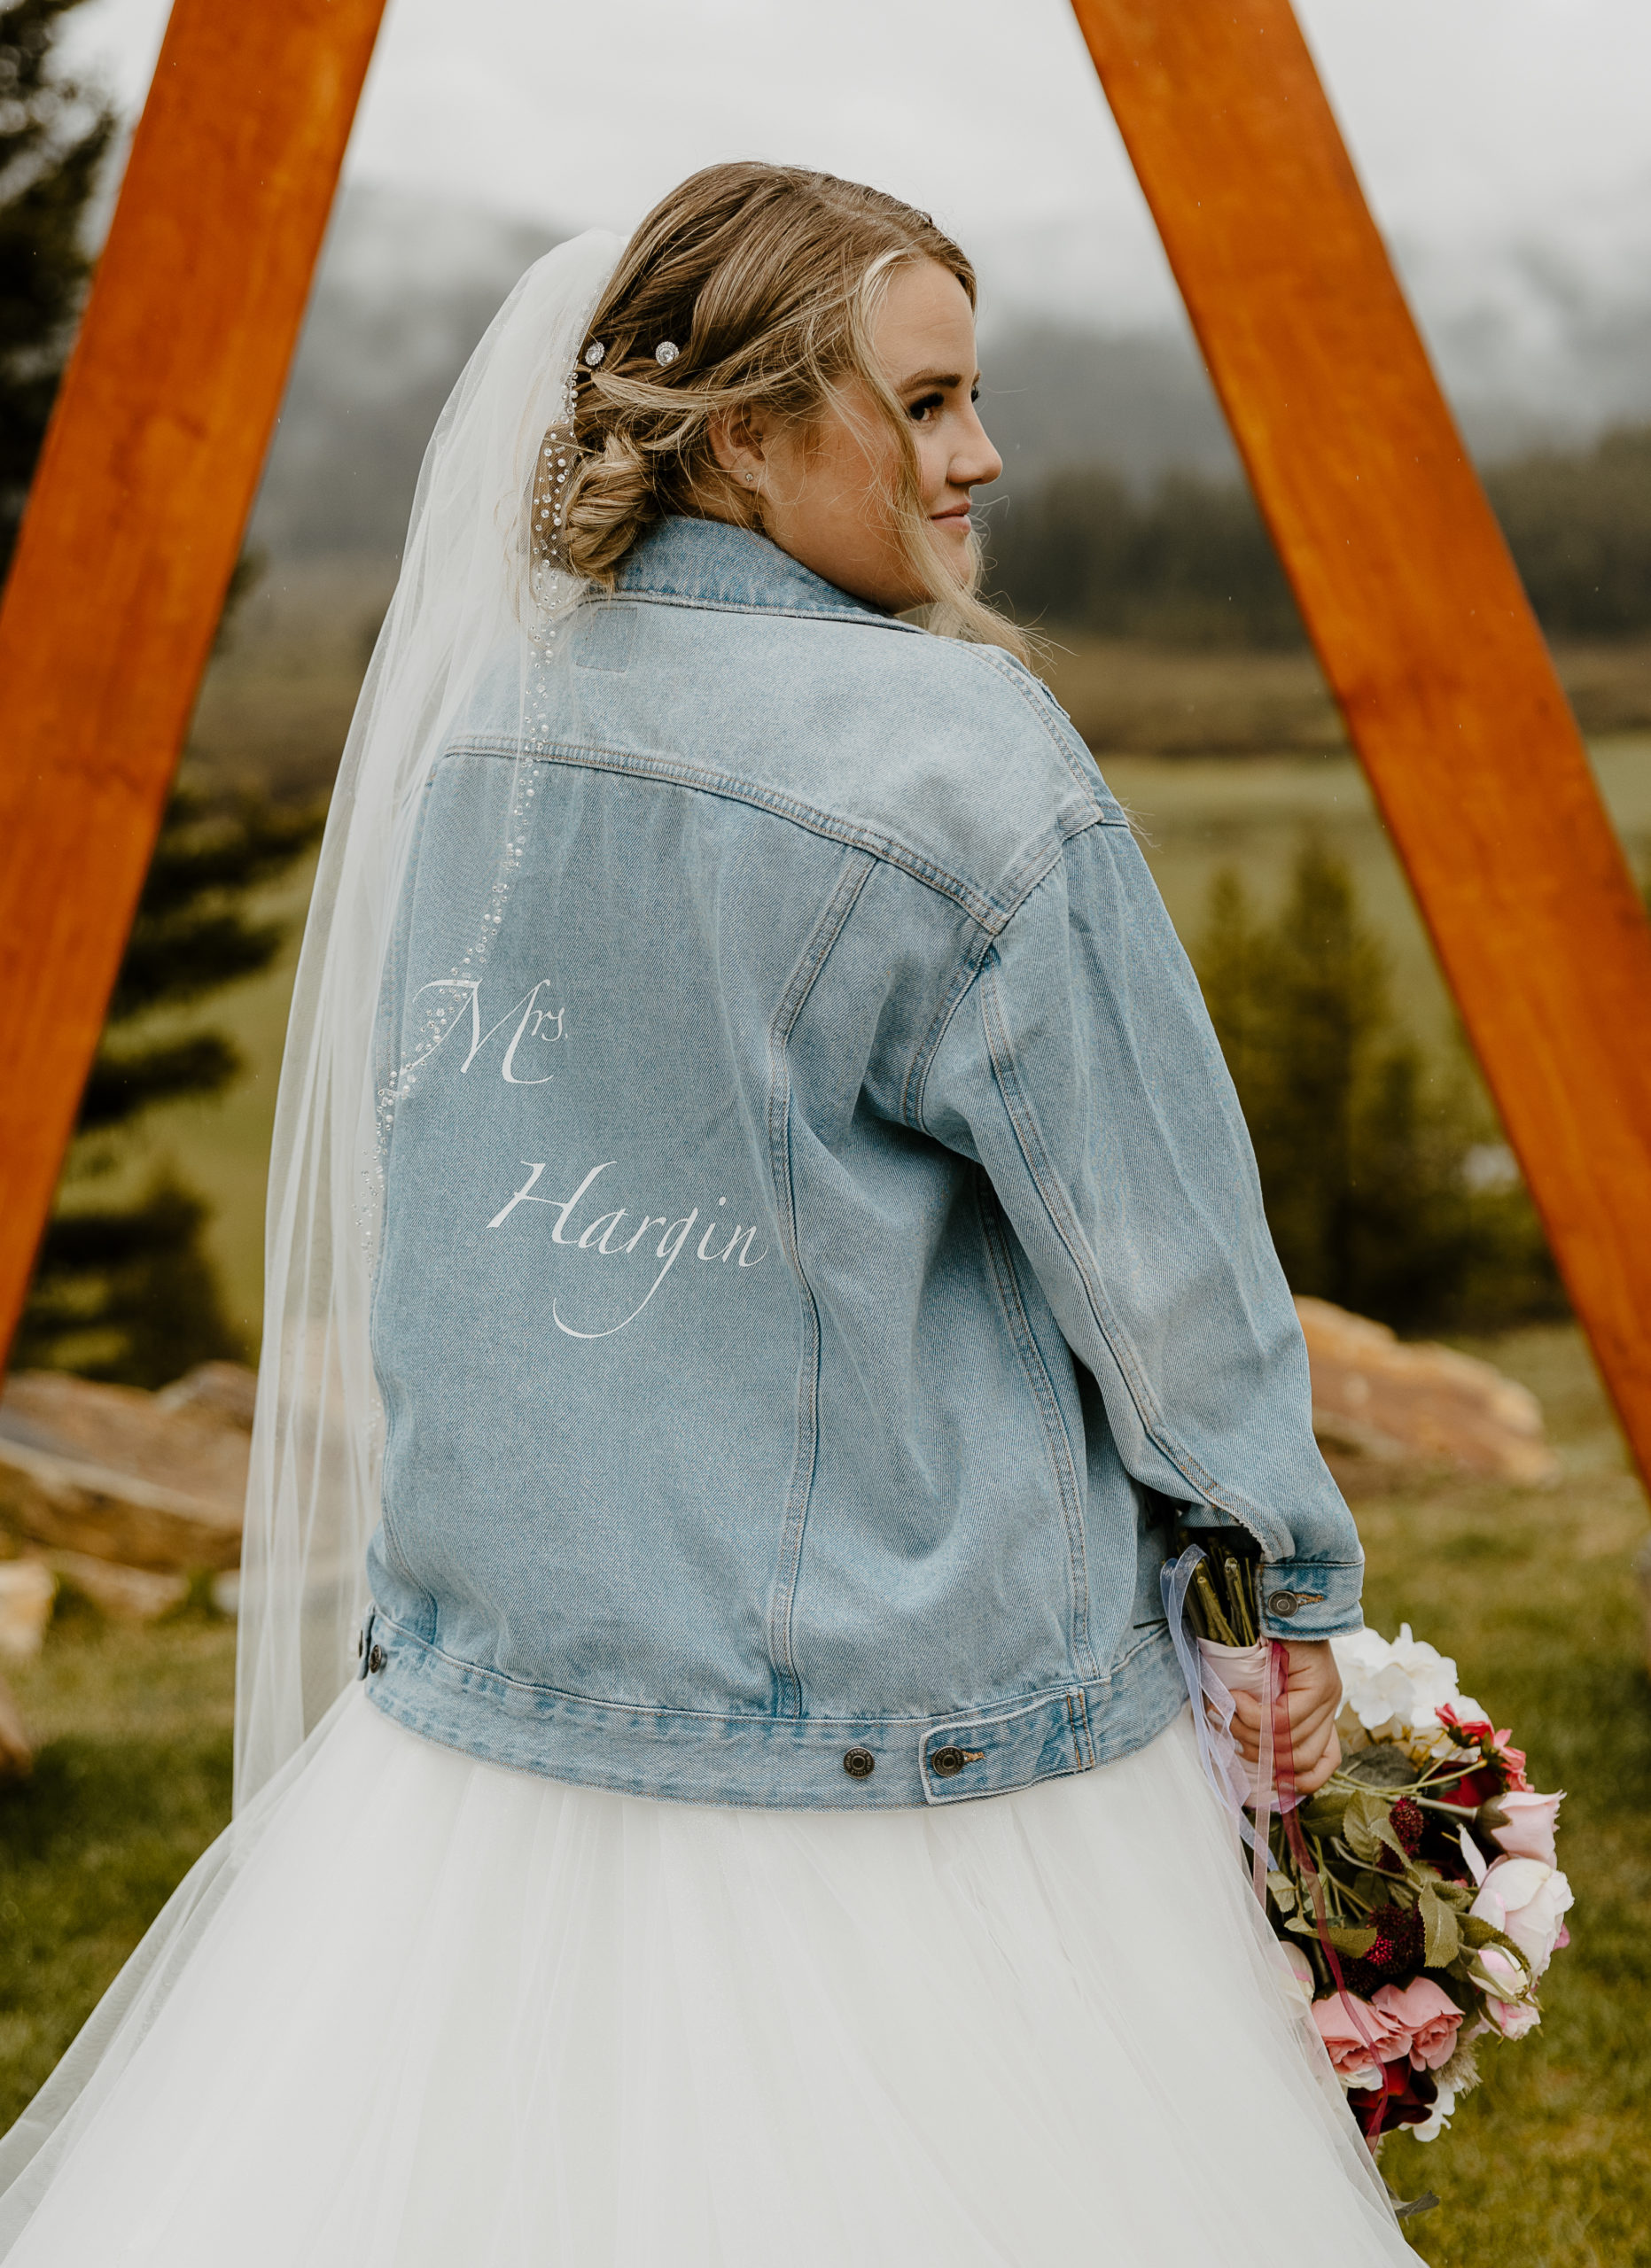 Montana bride with denim jacket, veil and wedding bouquet standing under a triangle arch